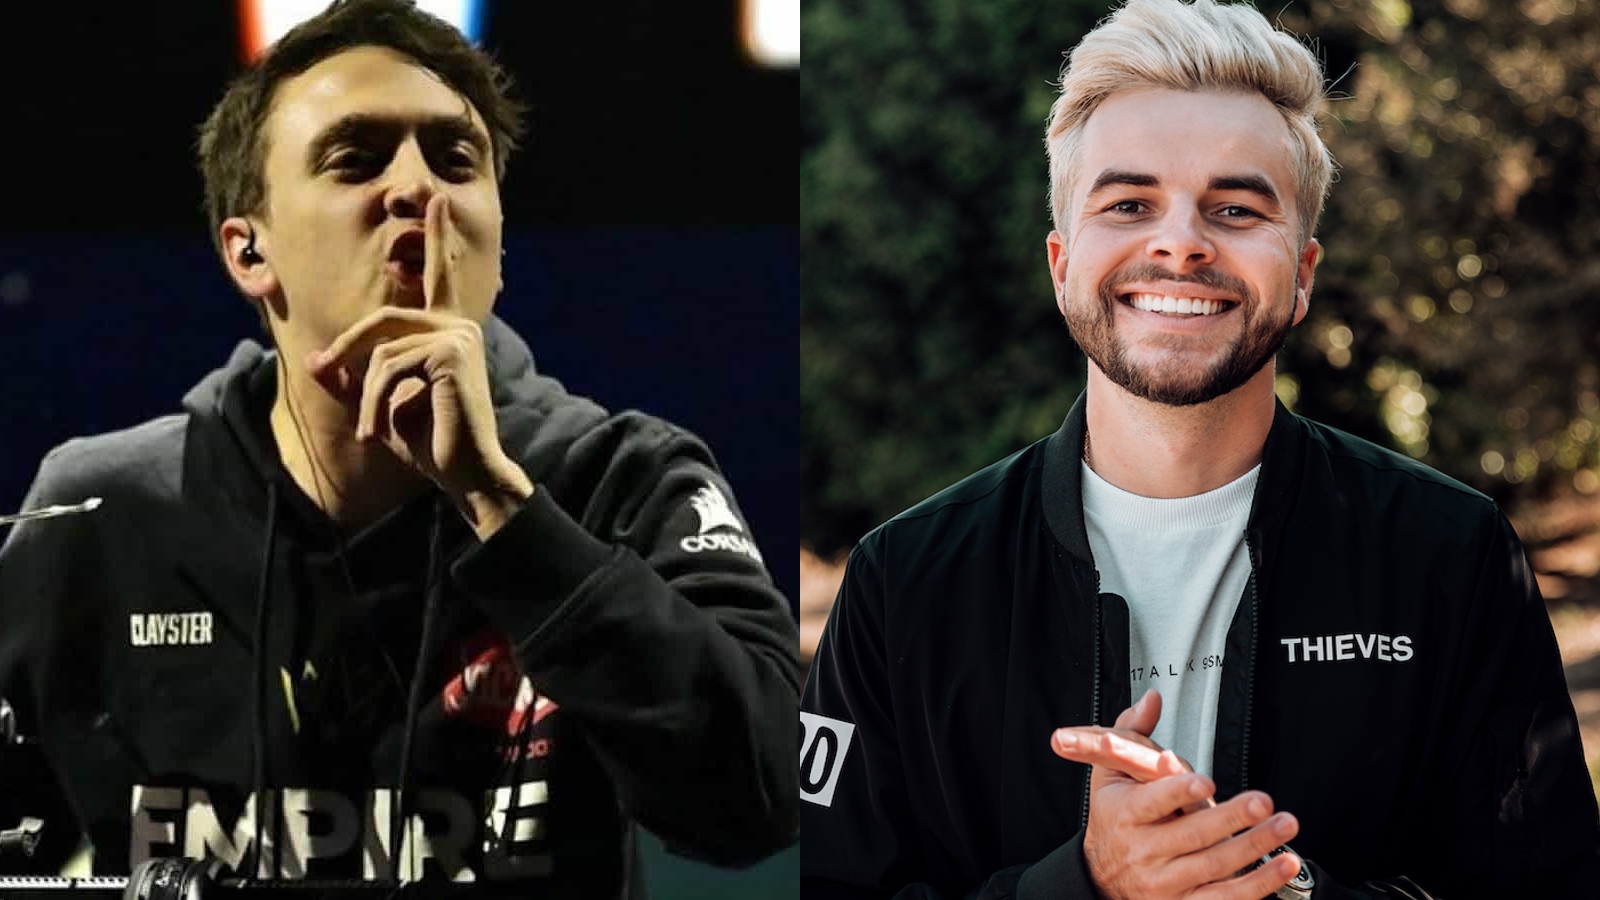 Clayster agrees with Nadeshot over Vegas Legion criticism: “He’s spitting info” – Egaxo